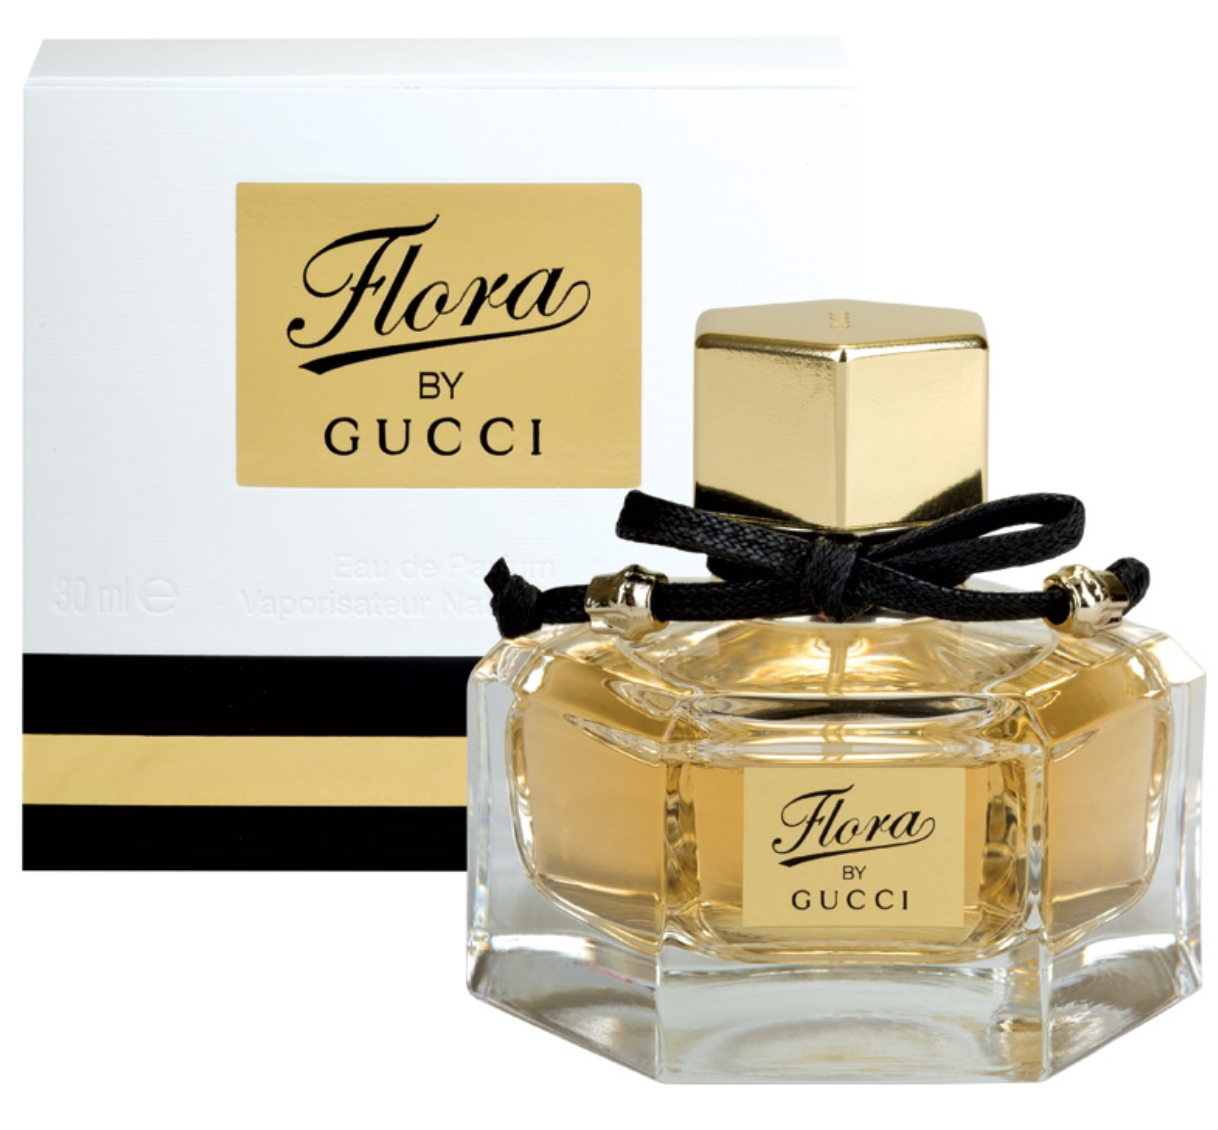 flora by gucci gold